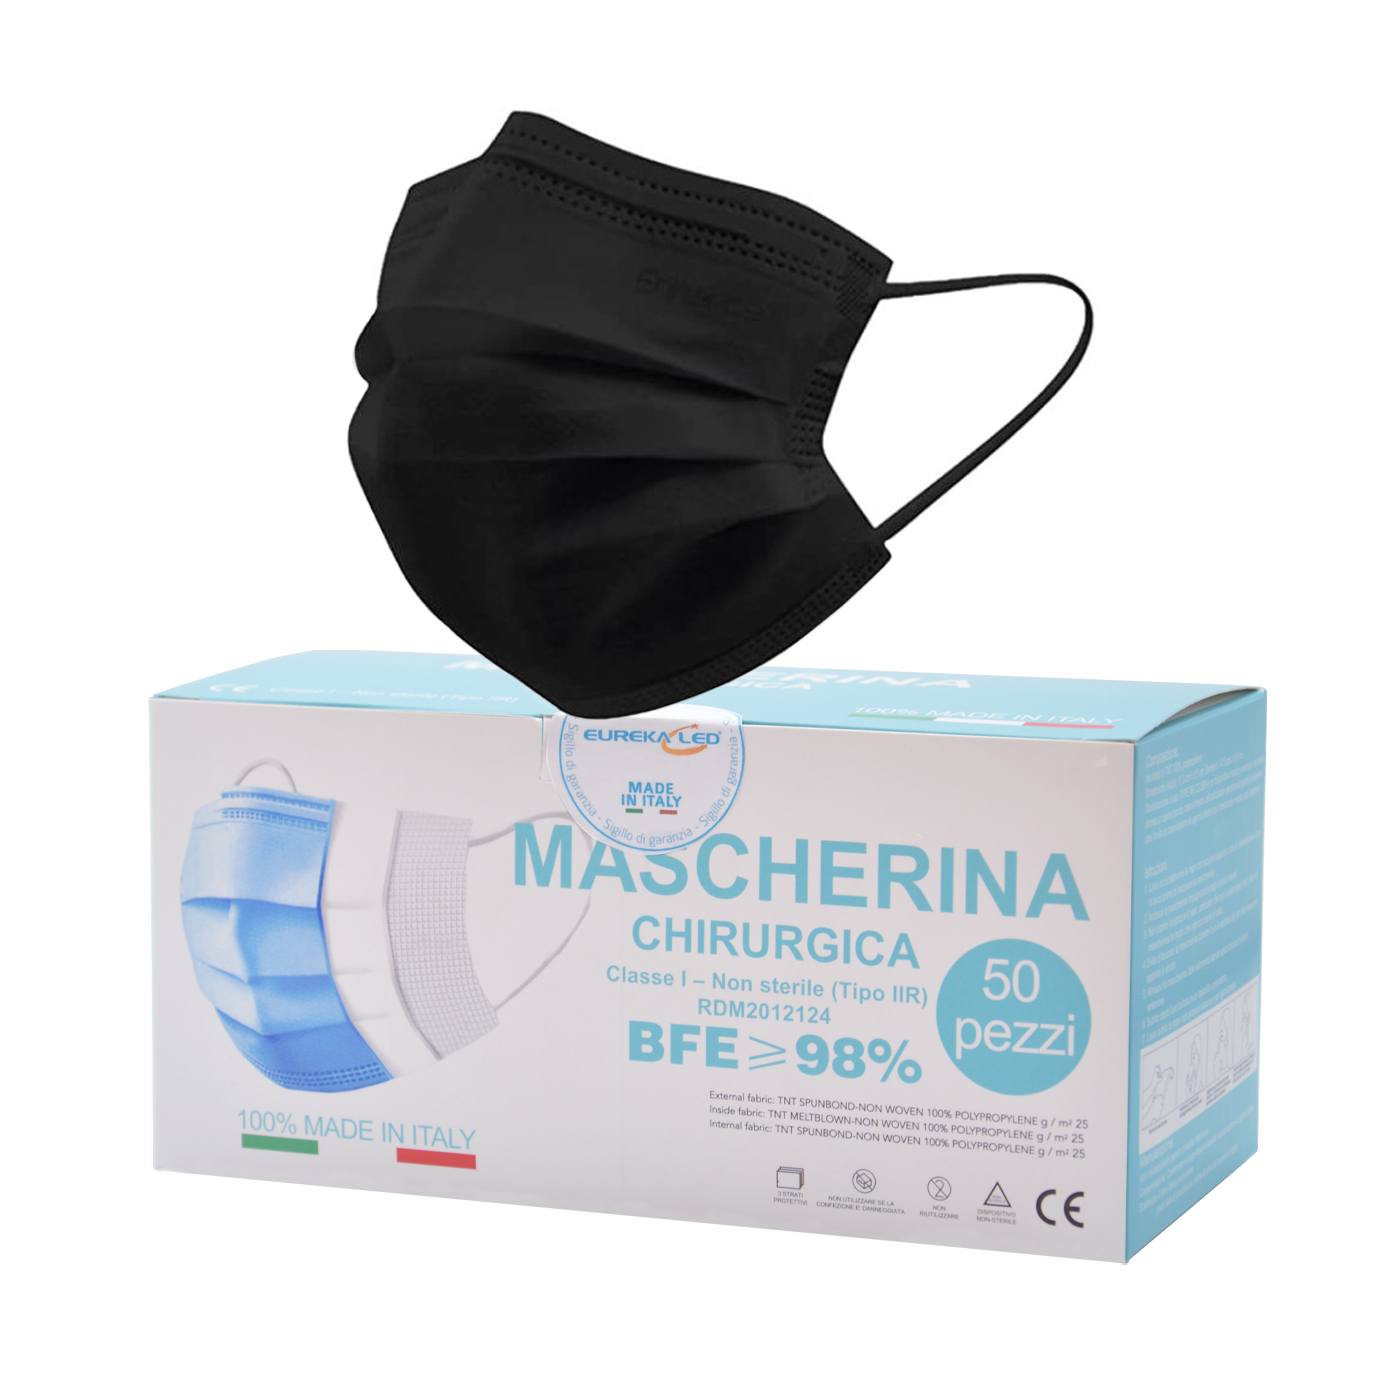 50 Mascherine chirurgiche Nere Made in Italy tipo IIR monouso a 3 strati  BFE 98% - Eureka Store